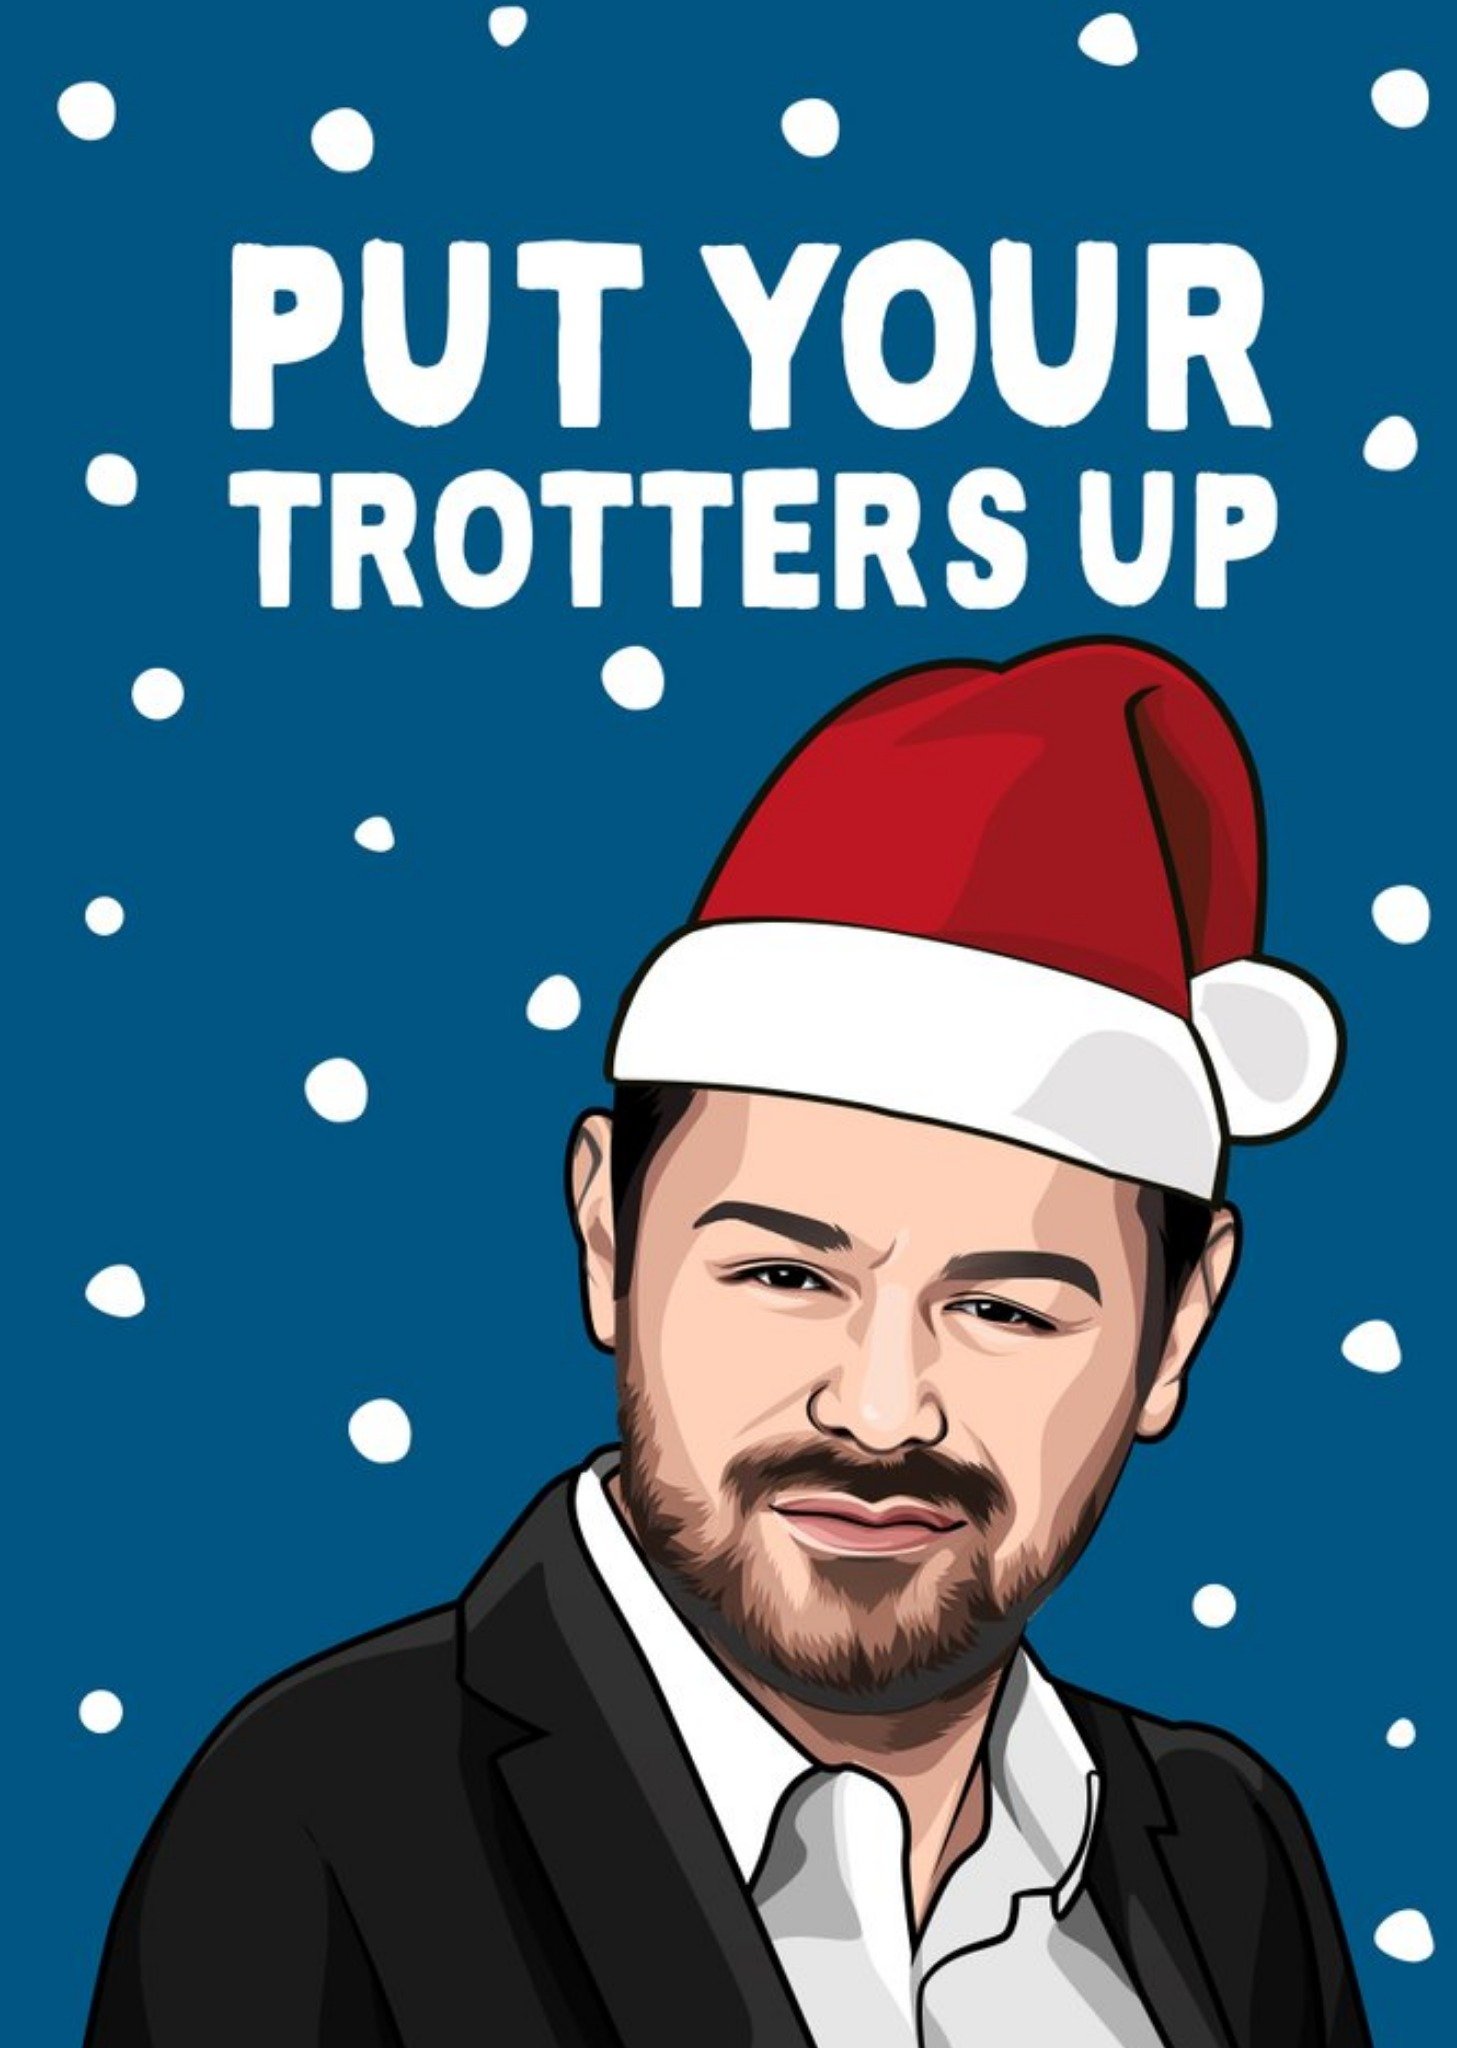 All Things Banter Put Your Trotters Up Tv Funny Spoof Christmas Card Ecard